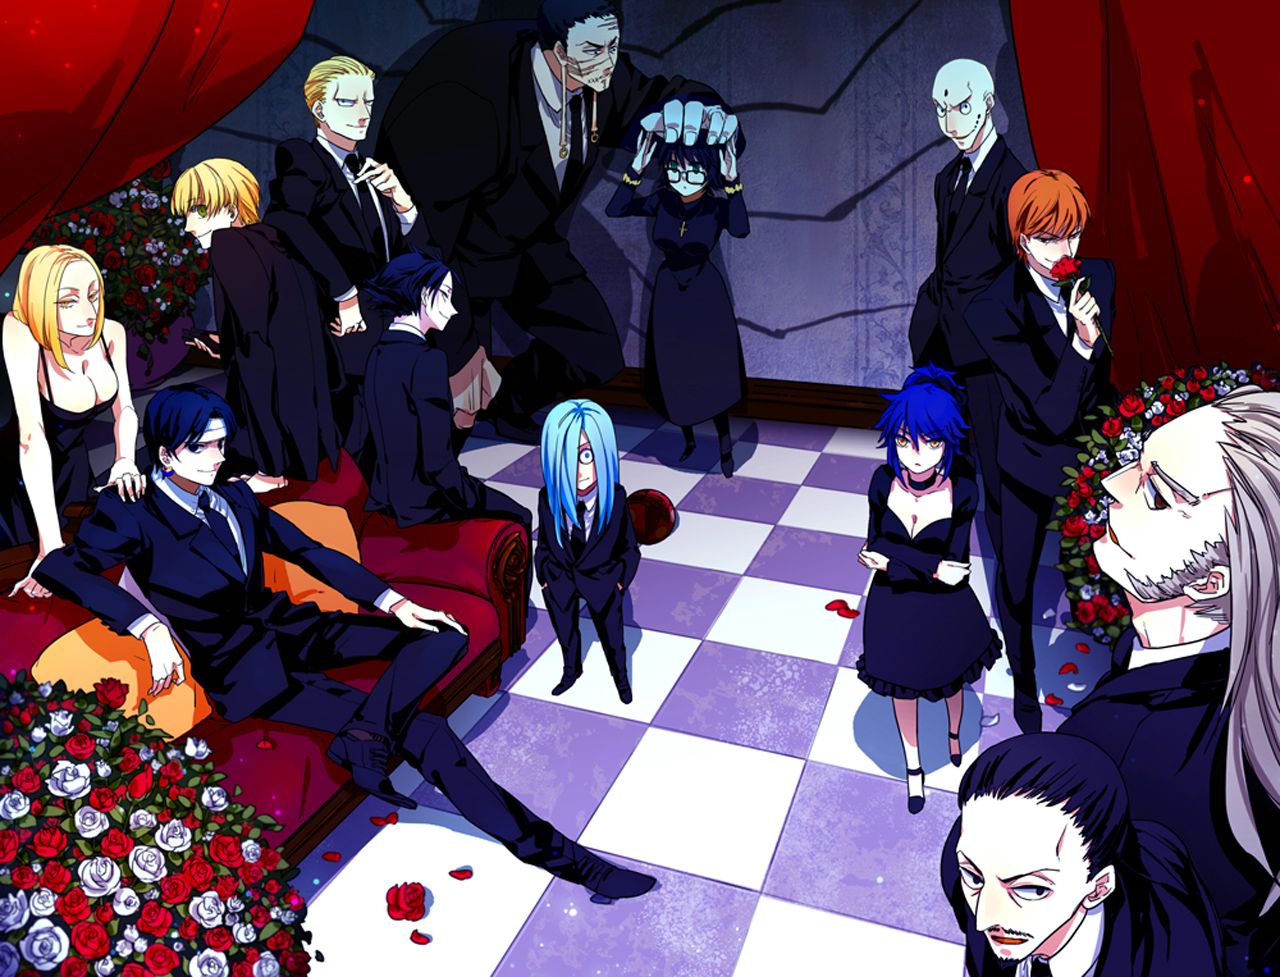 Best 50+ Phantom Troupe Wallpapers on HipWallpapers.